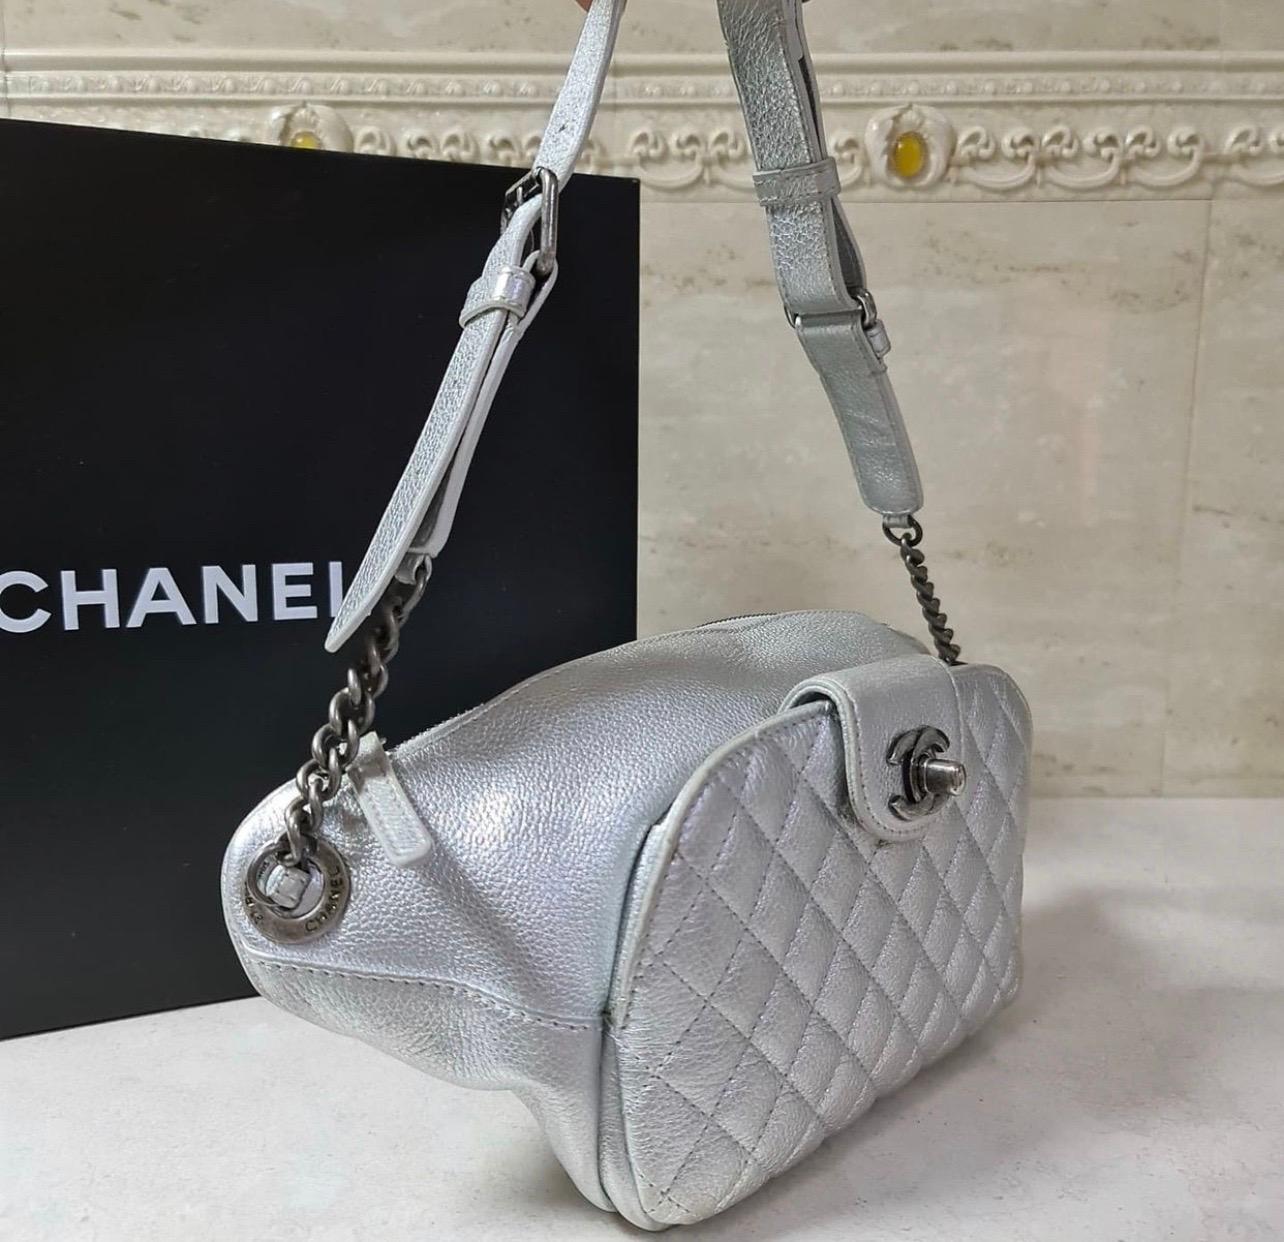 Chanel, silver, fanny pack in grained, quilted calfskin with silver hardware. The fanny pack has a chain link and leather belt strap with adjustment links and a top zipper pocket.

Very good condition. 

Has hardly ever seen worn areas.

36*16cm

No